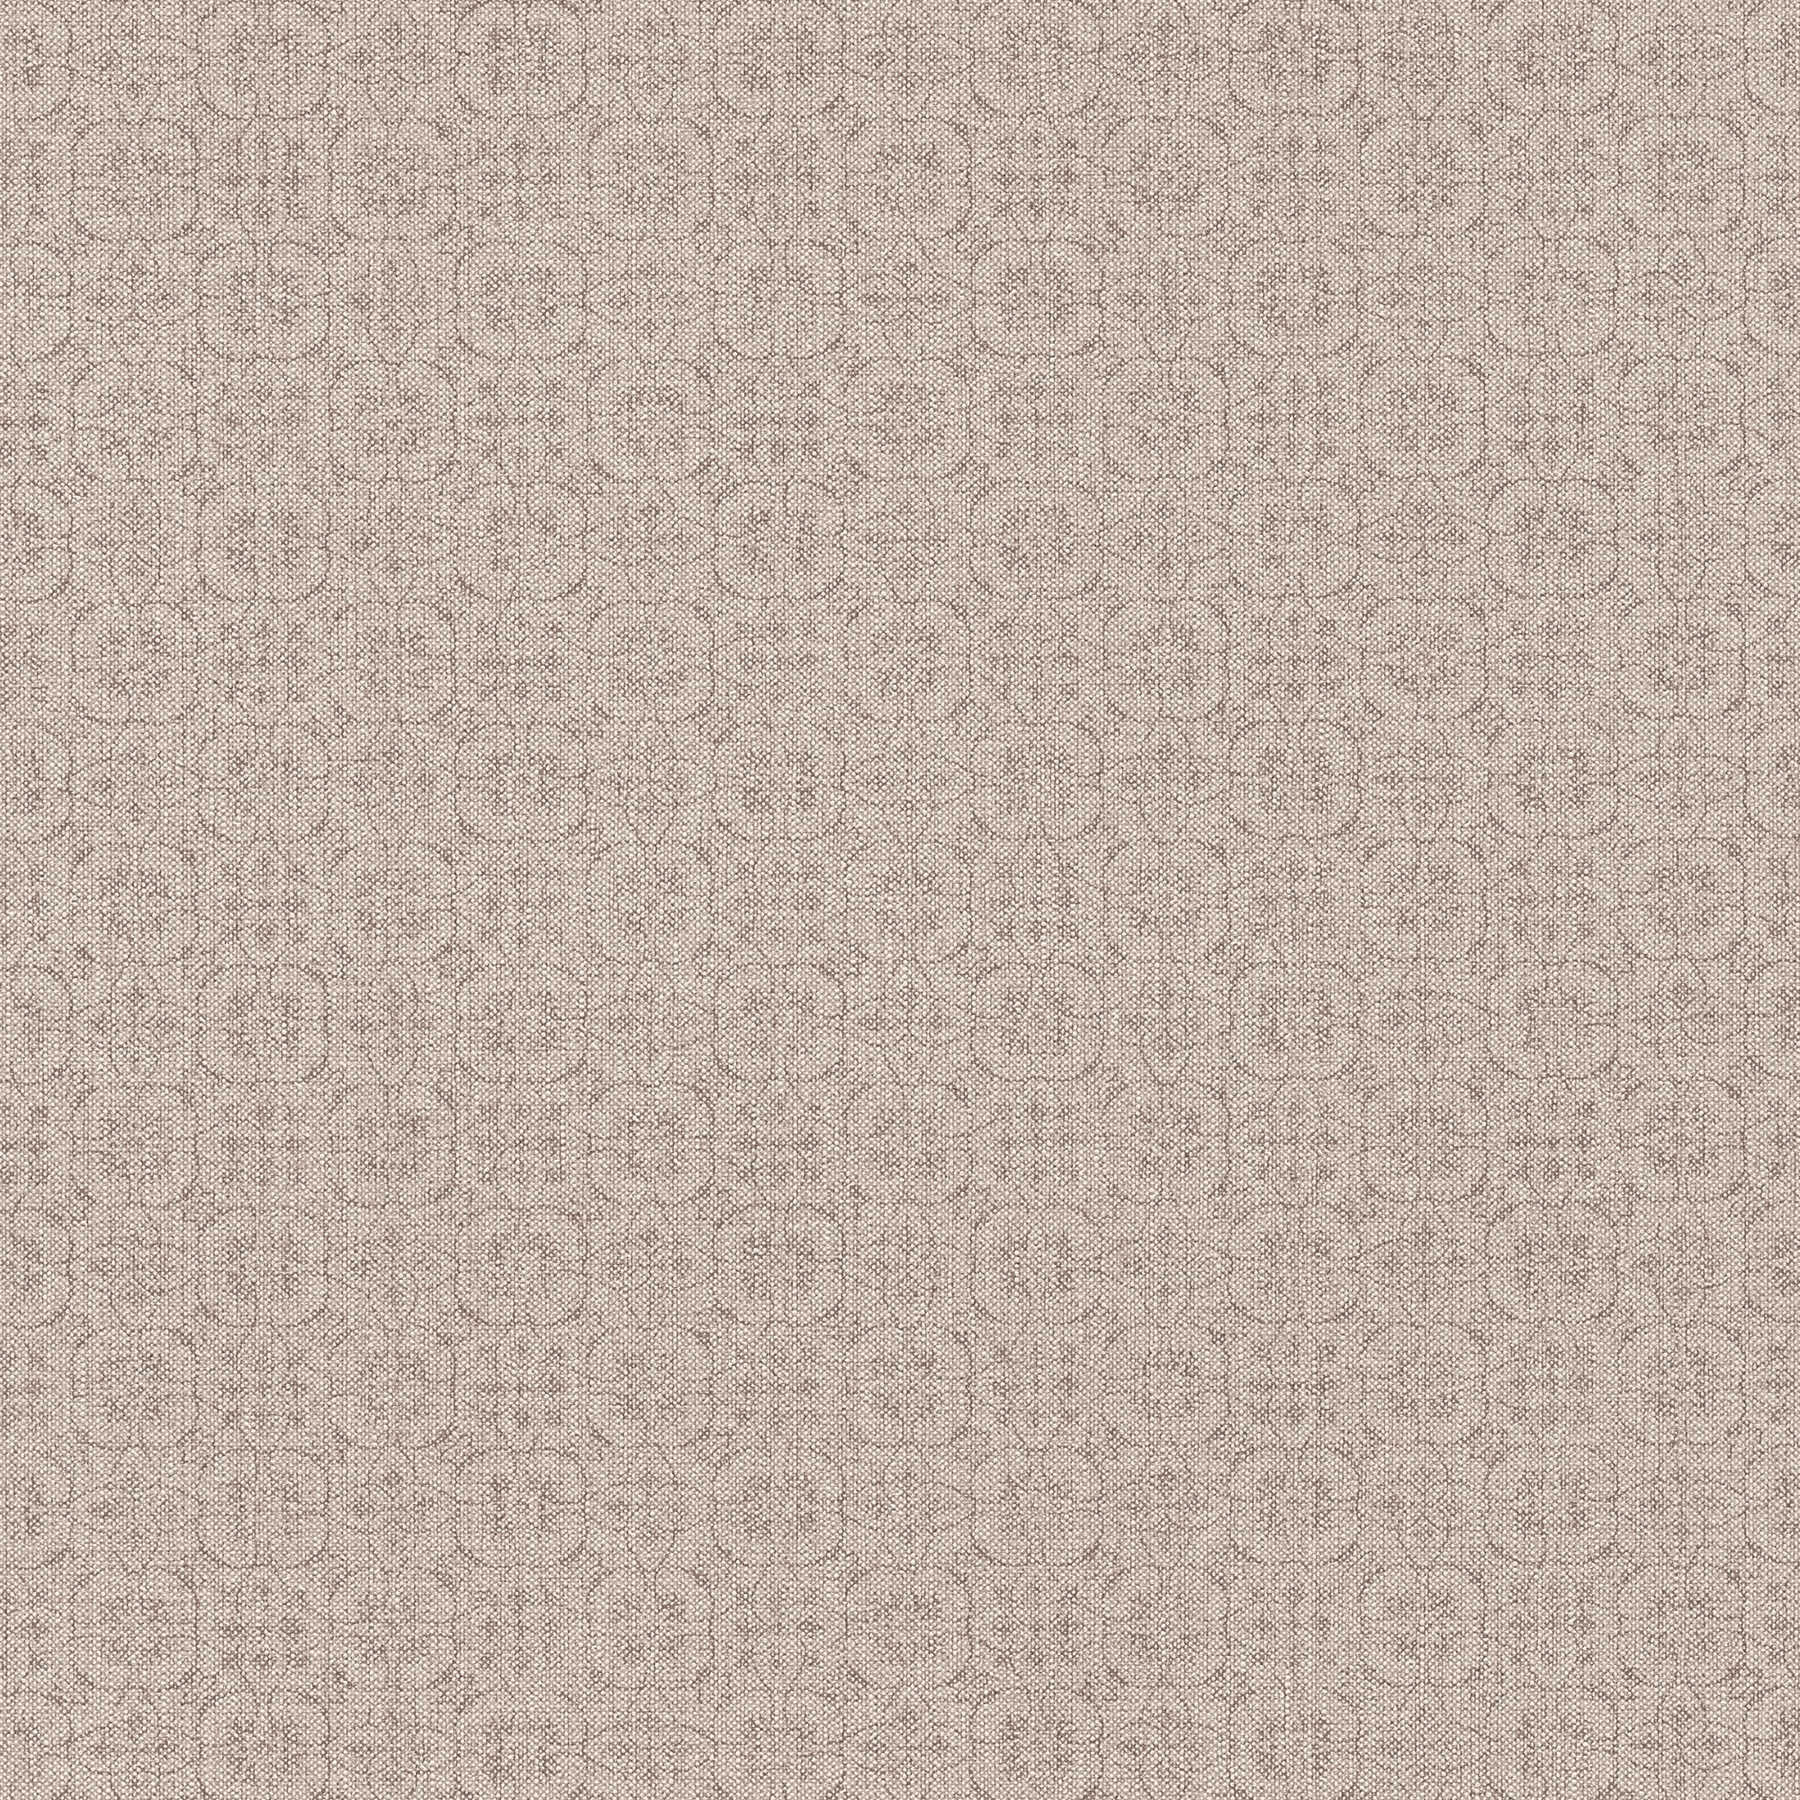 Linen look wallpaper with scandi style pattern - brown
